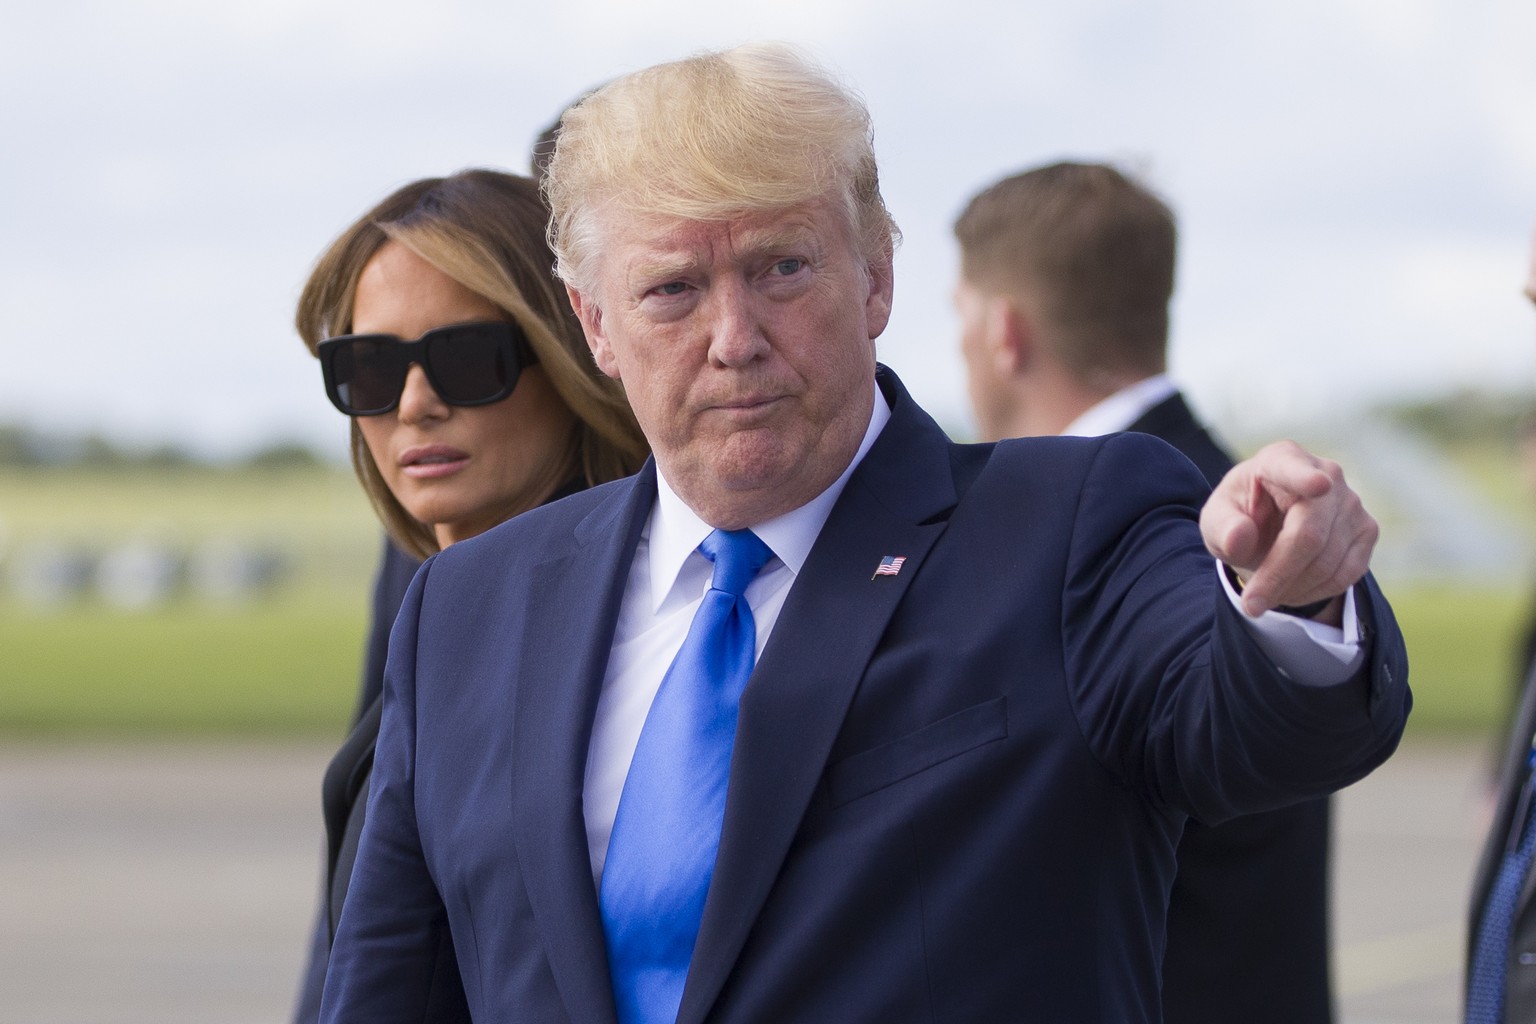 President Donald Trump, with first lady Melania Trump, points as they arrive at Shannon Airport, Thursday, June 6, 2019, in Shannon, Ireland. (AP Photo/Alex Brandon)